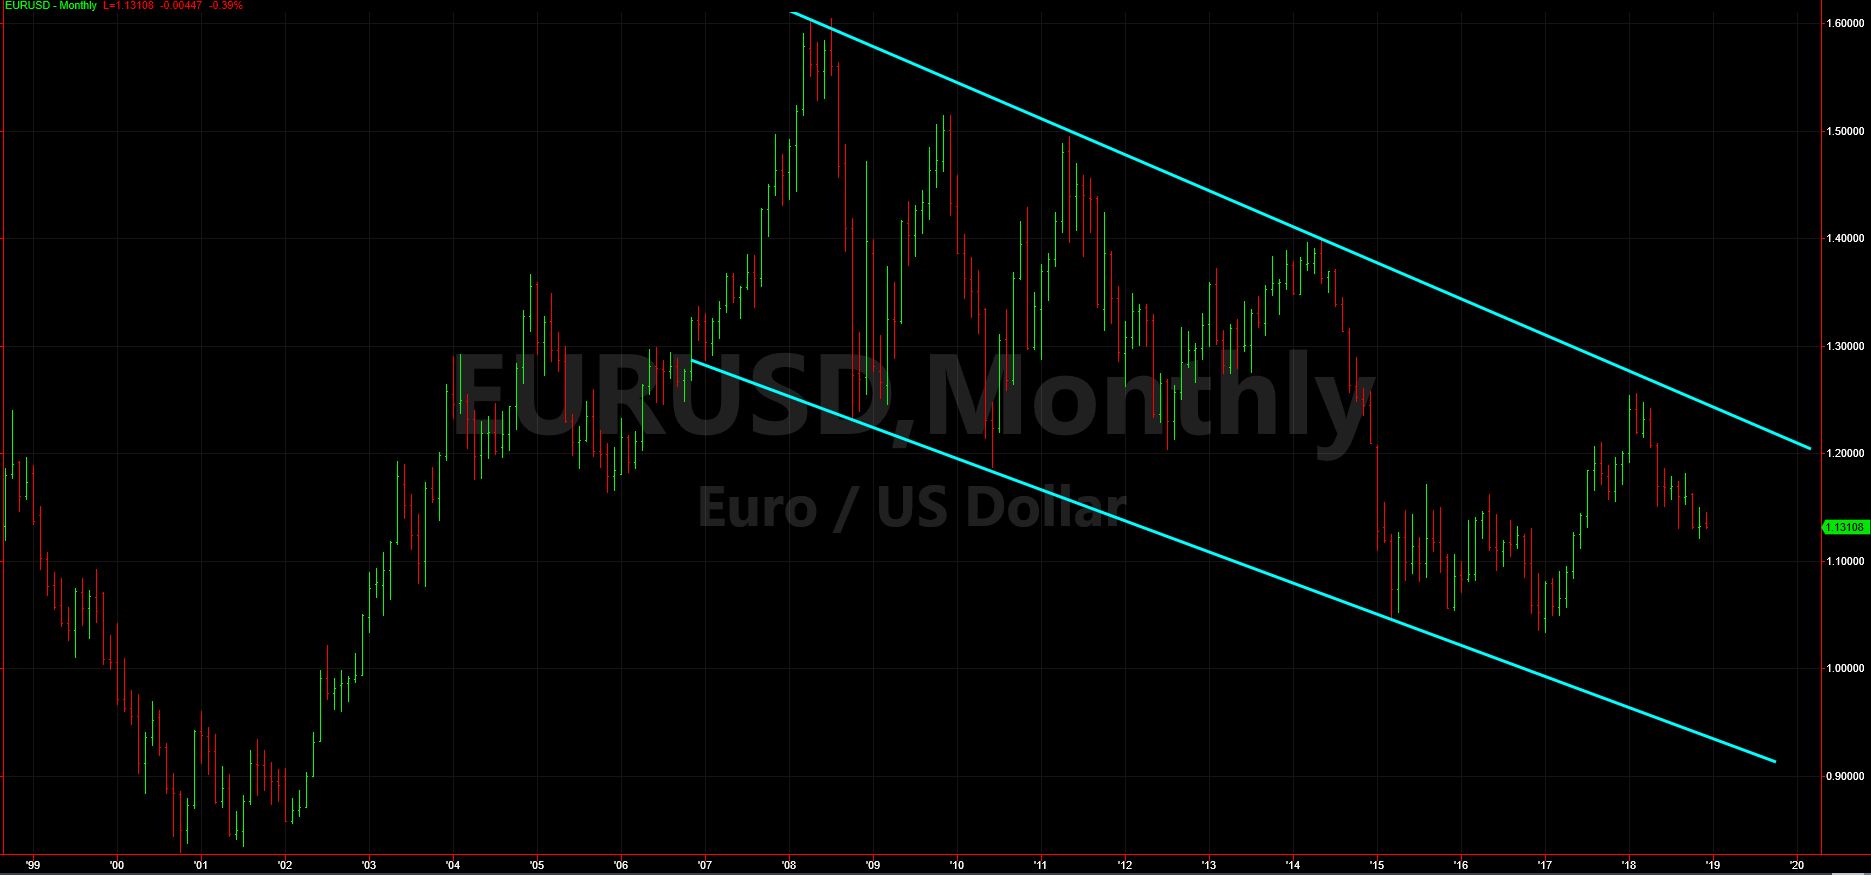 Euro/USD Monthly Chart for Nov 2018 Growth Portfolio Update